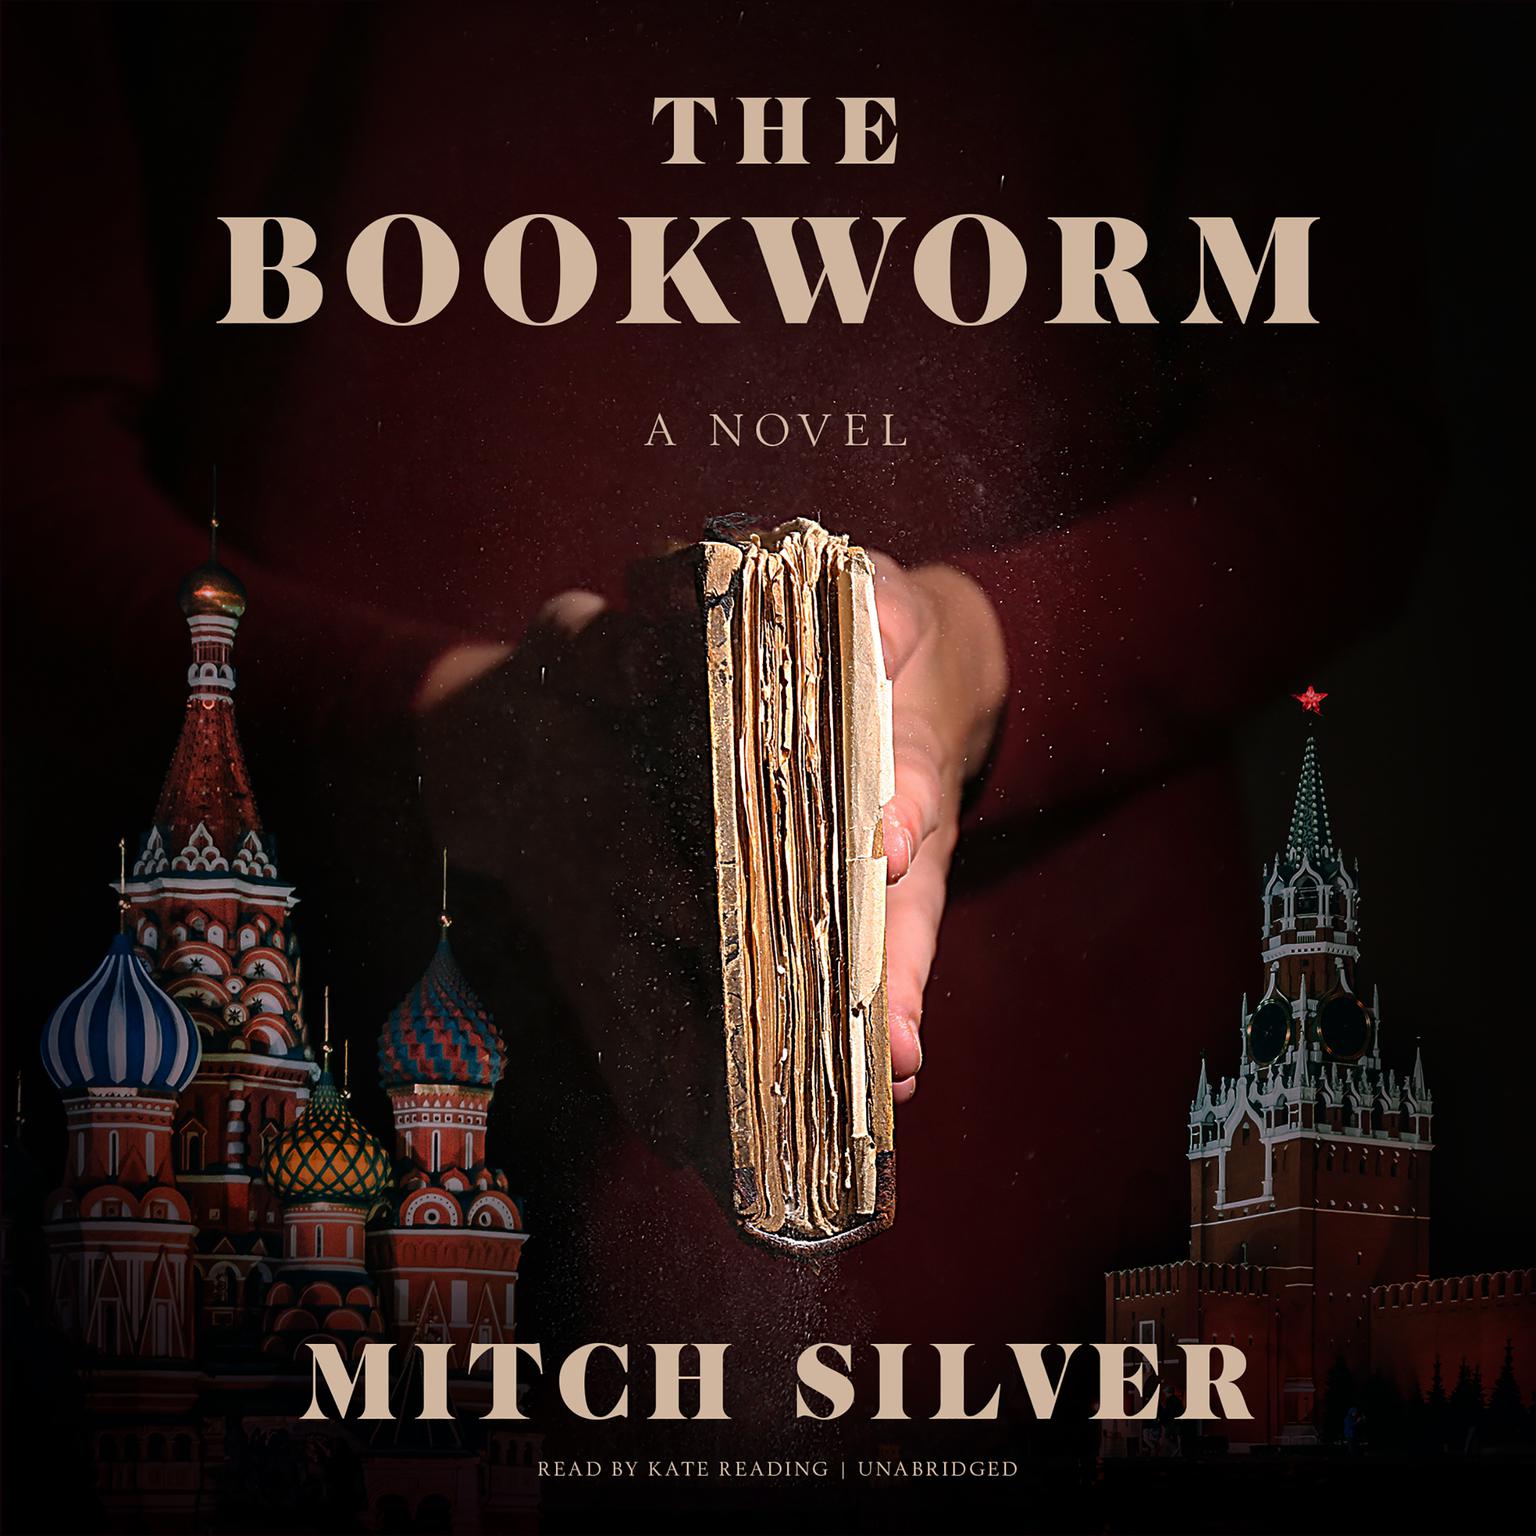 The Bookworm: A Novel Audiobook, by Mitch Silver